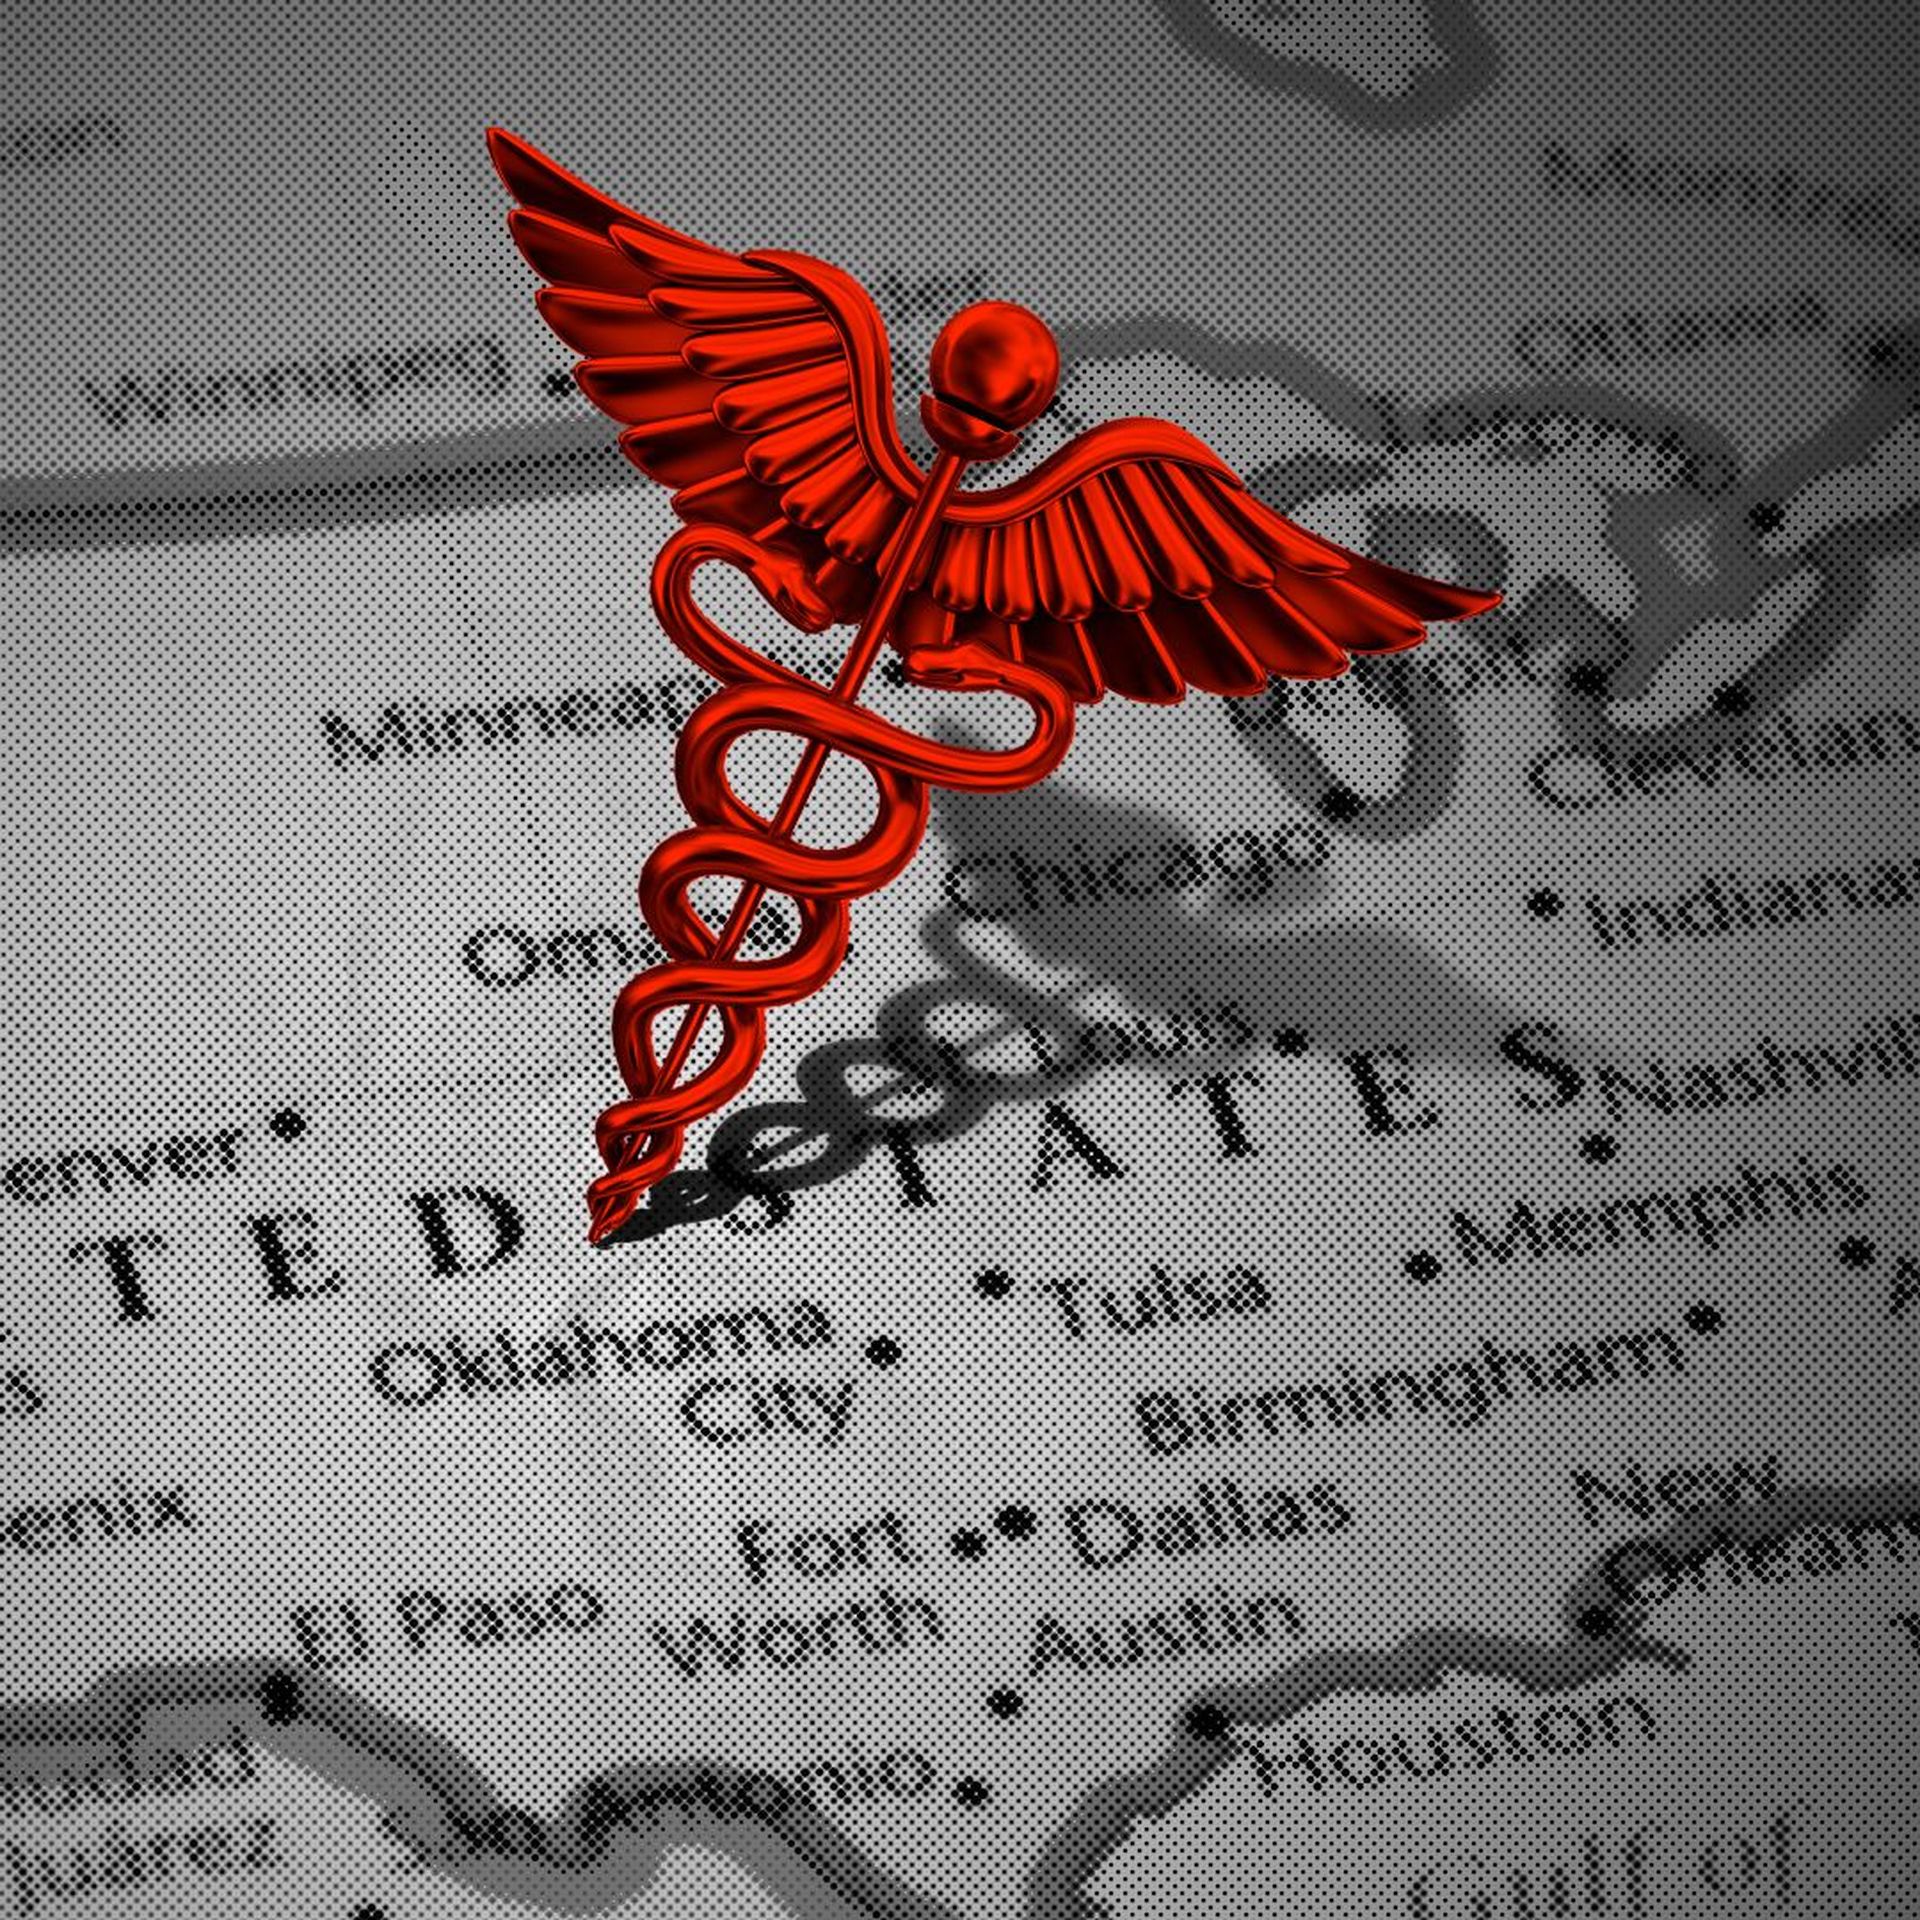 Illustration of a caduceus spearing a map of the United States.